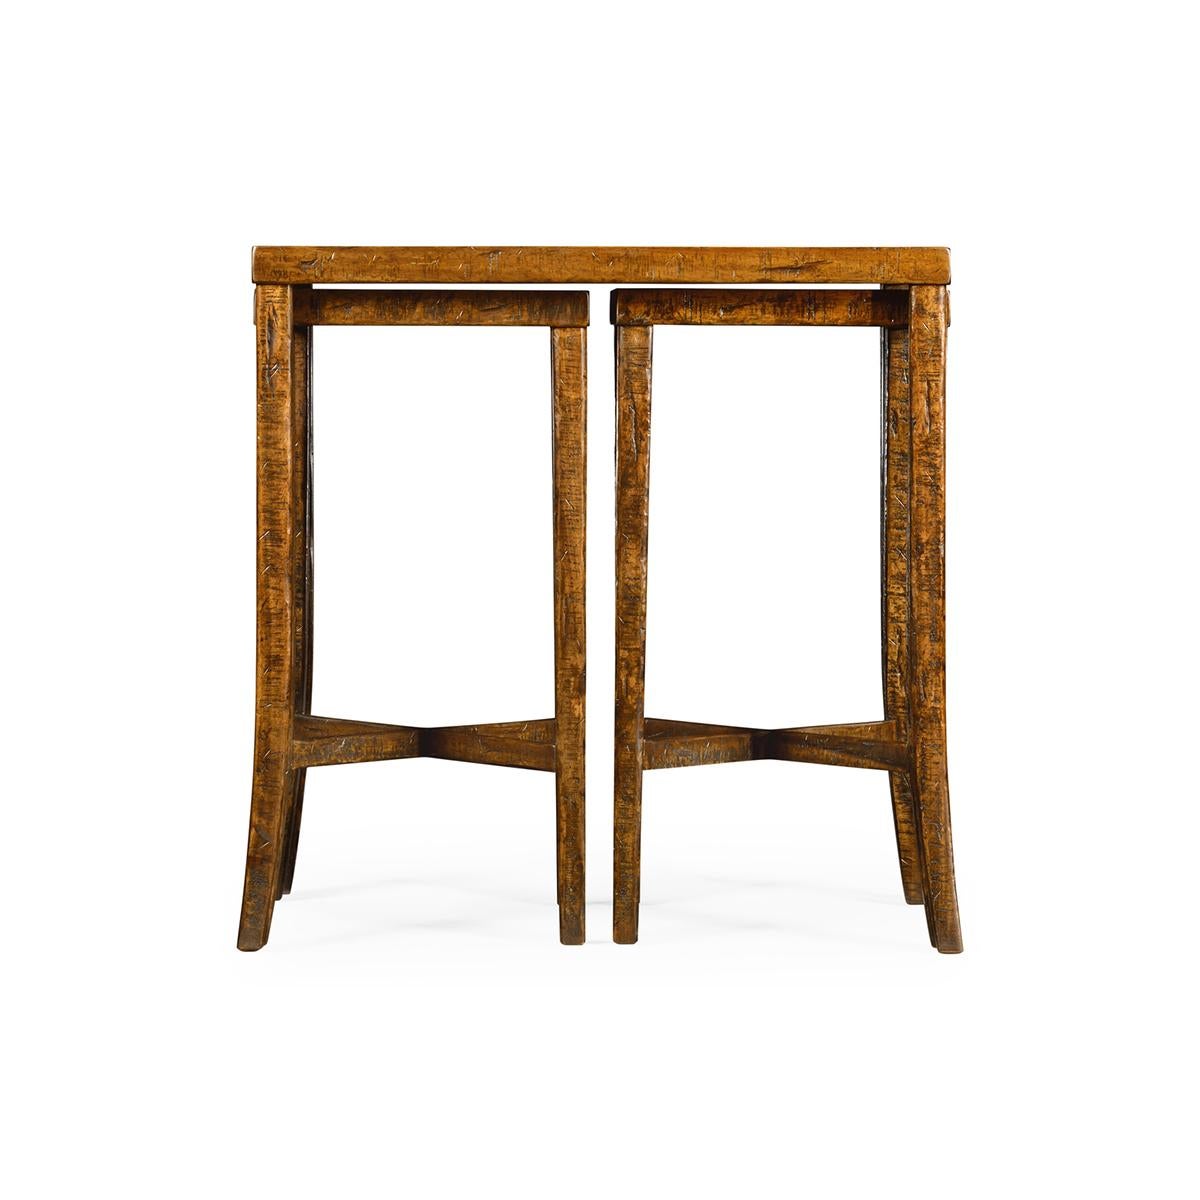 Vietnamese Rustic Country Nesting Tables, Walnut Finish For Sale